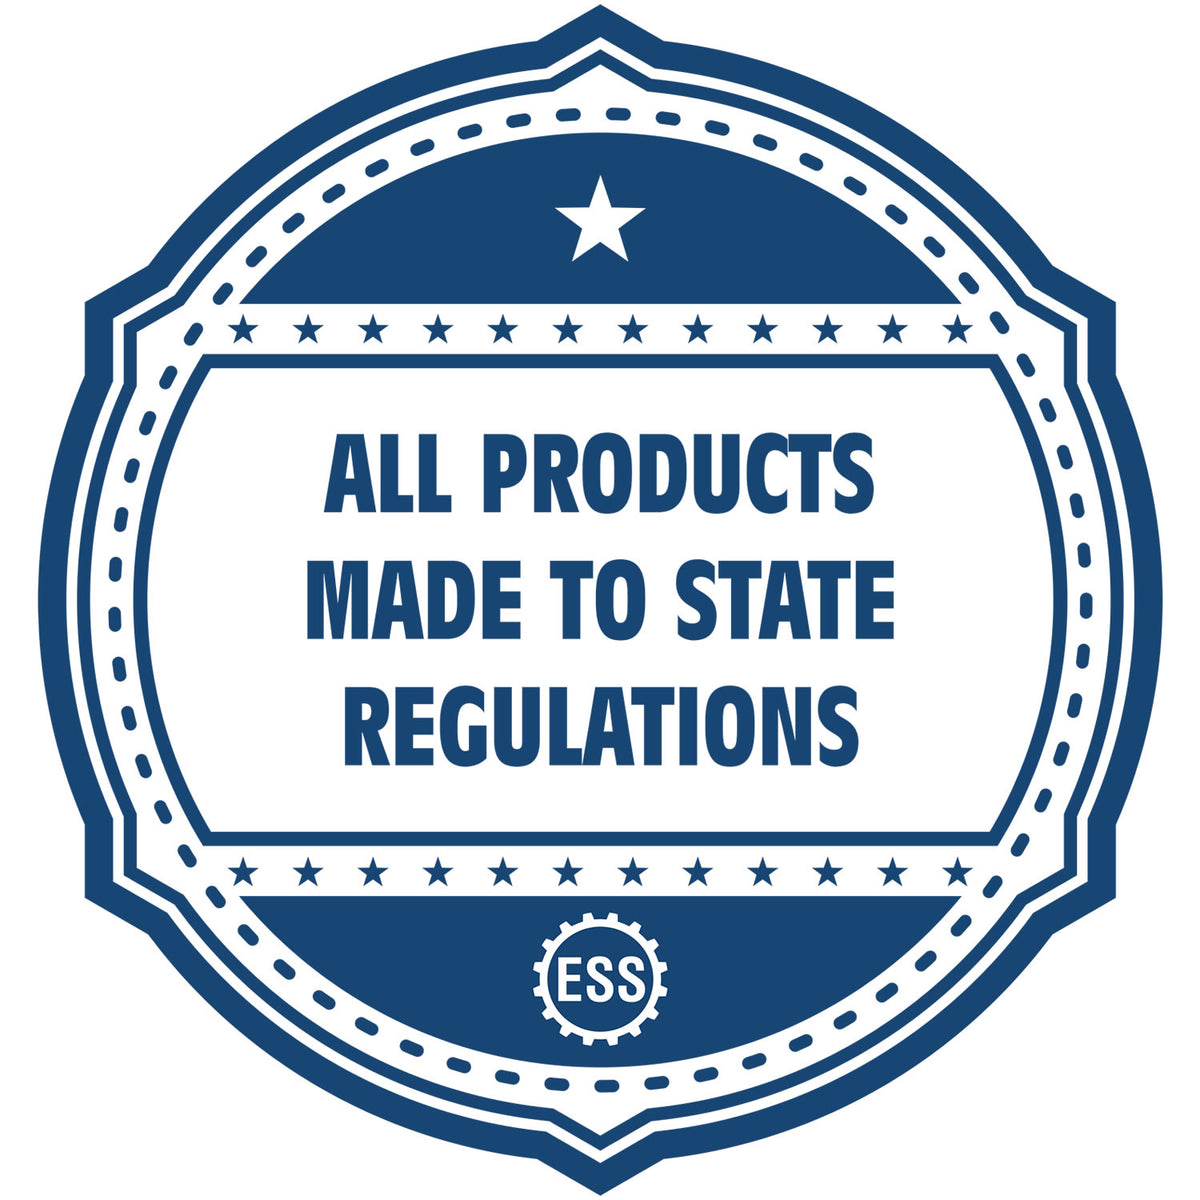 An icon or badge element for the Handheld New York Architect Seal Embosser showing that this product is made in compliance with state regulations.